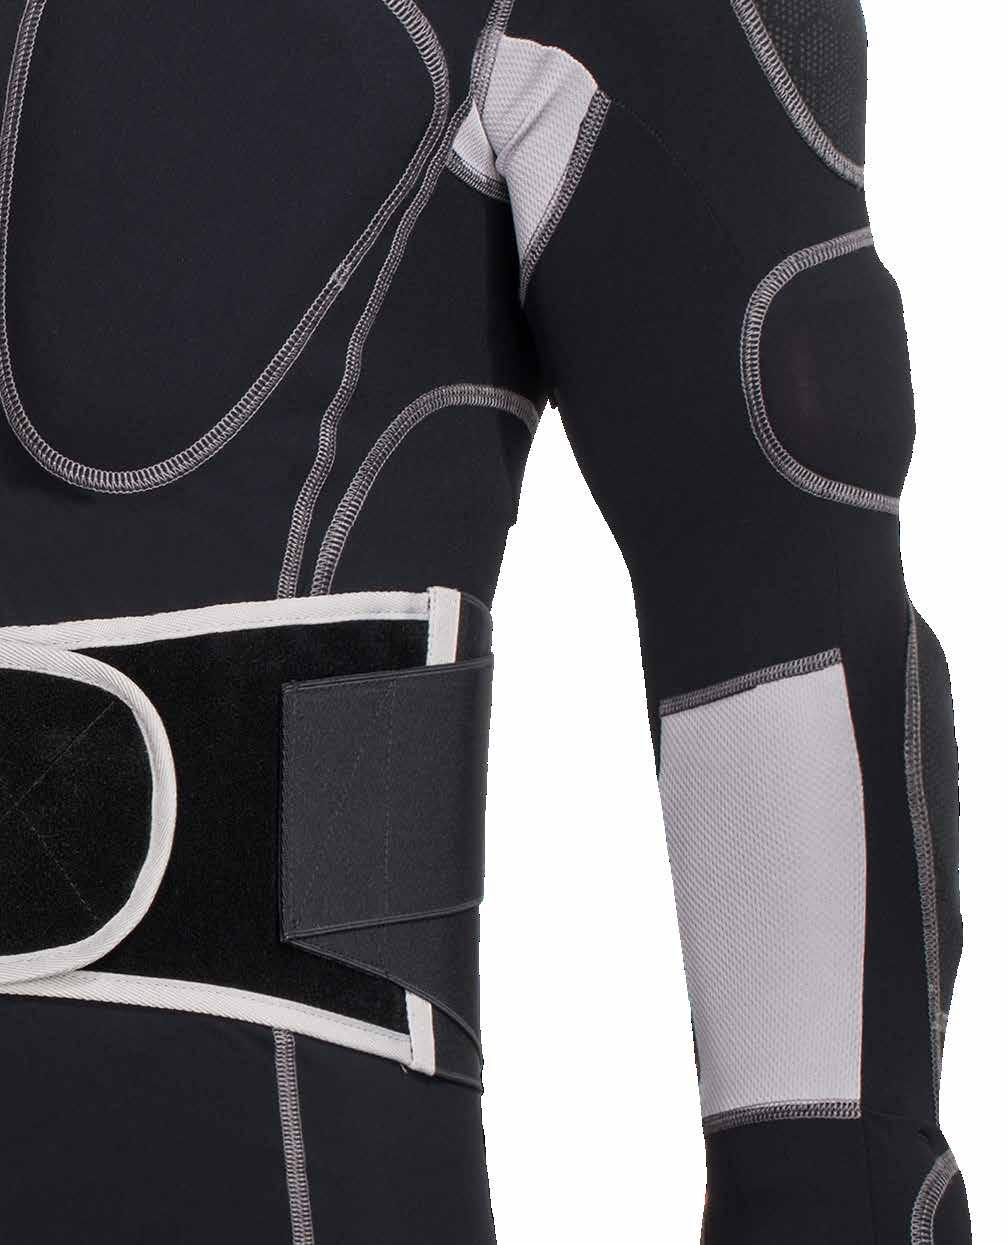 MODULAR SYSTEM The D3O protective pads are fitted into skintight garments featuring pockets to insert the pads.